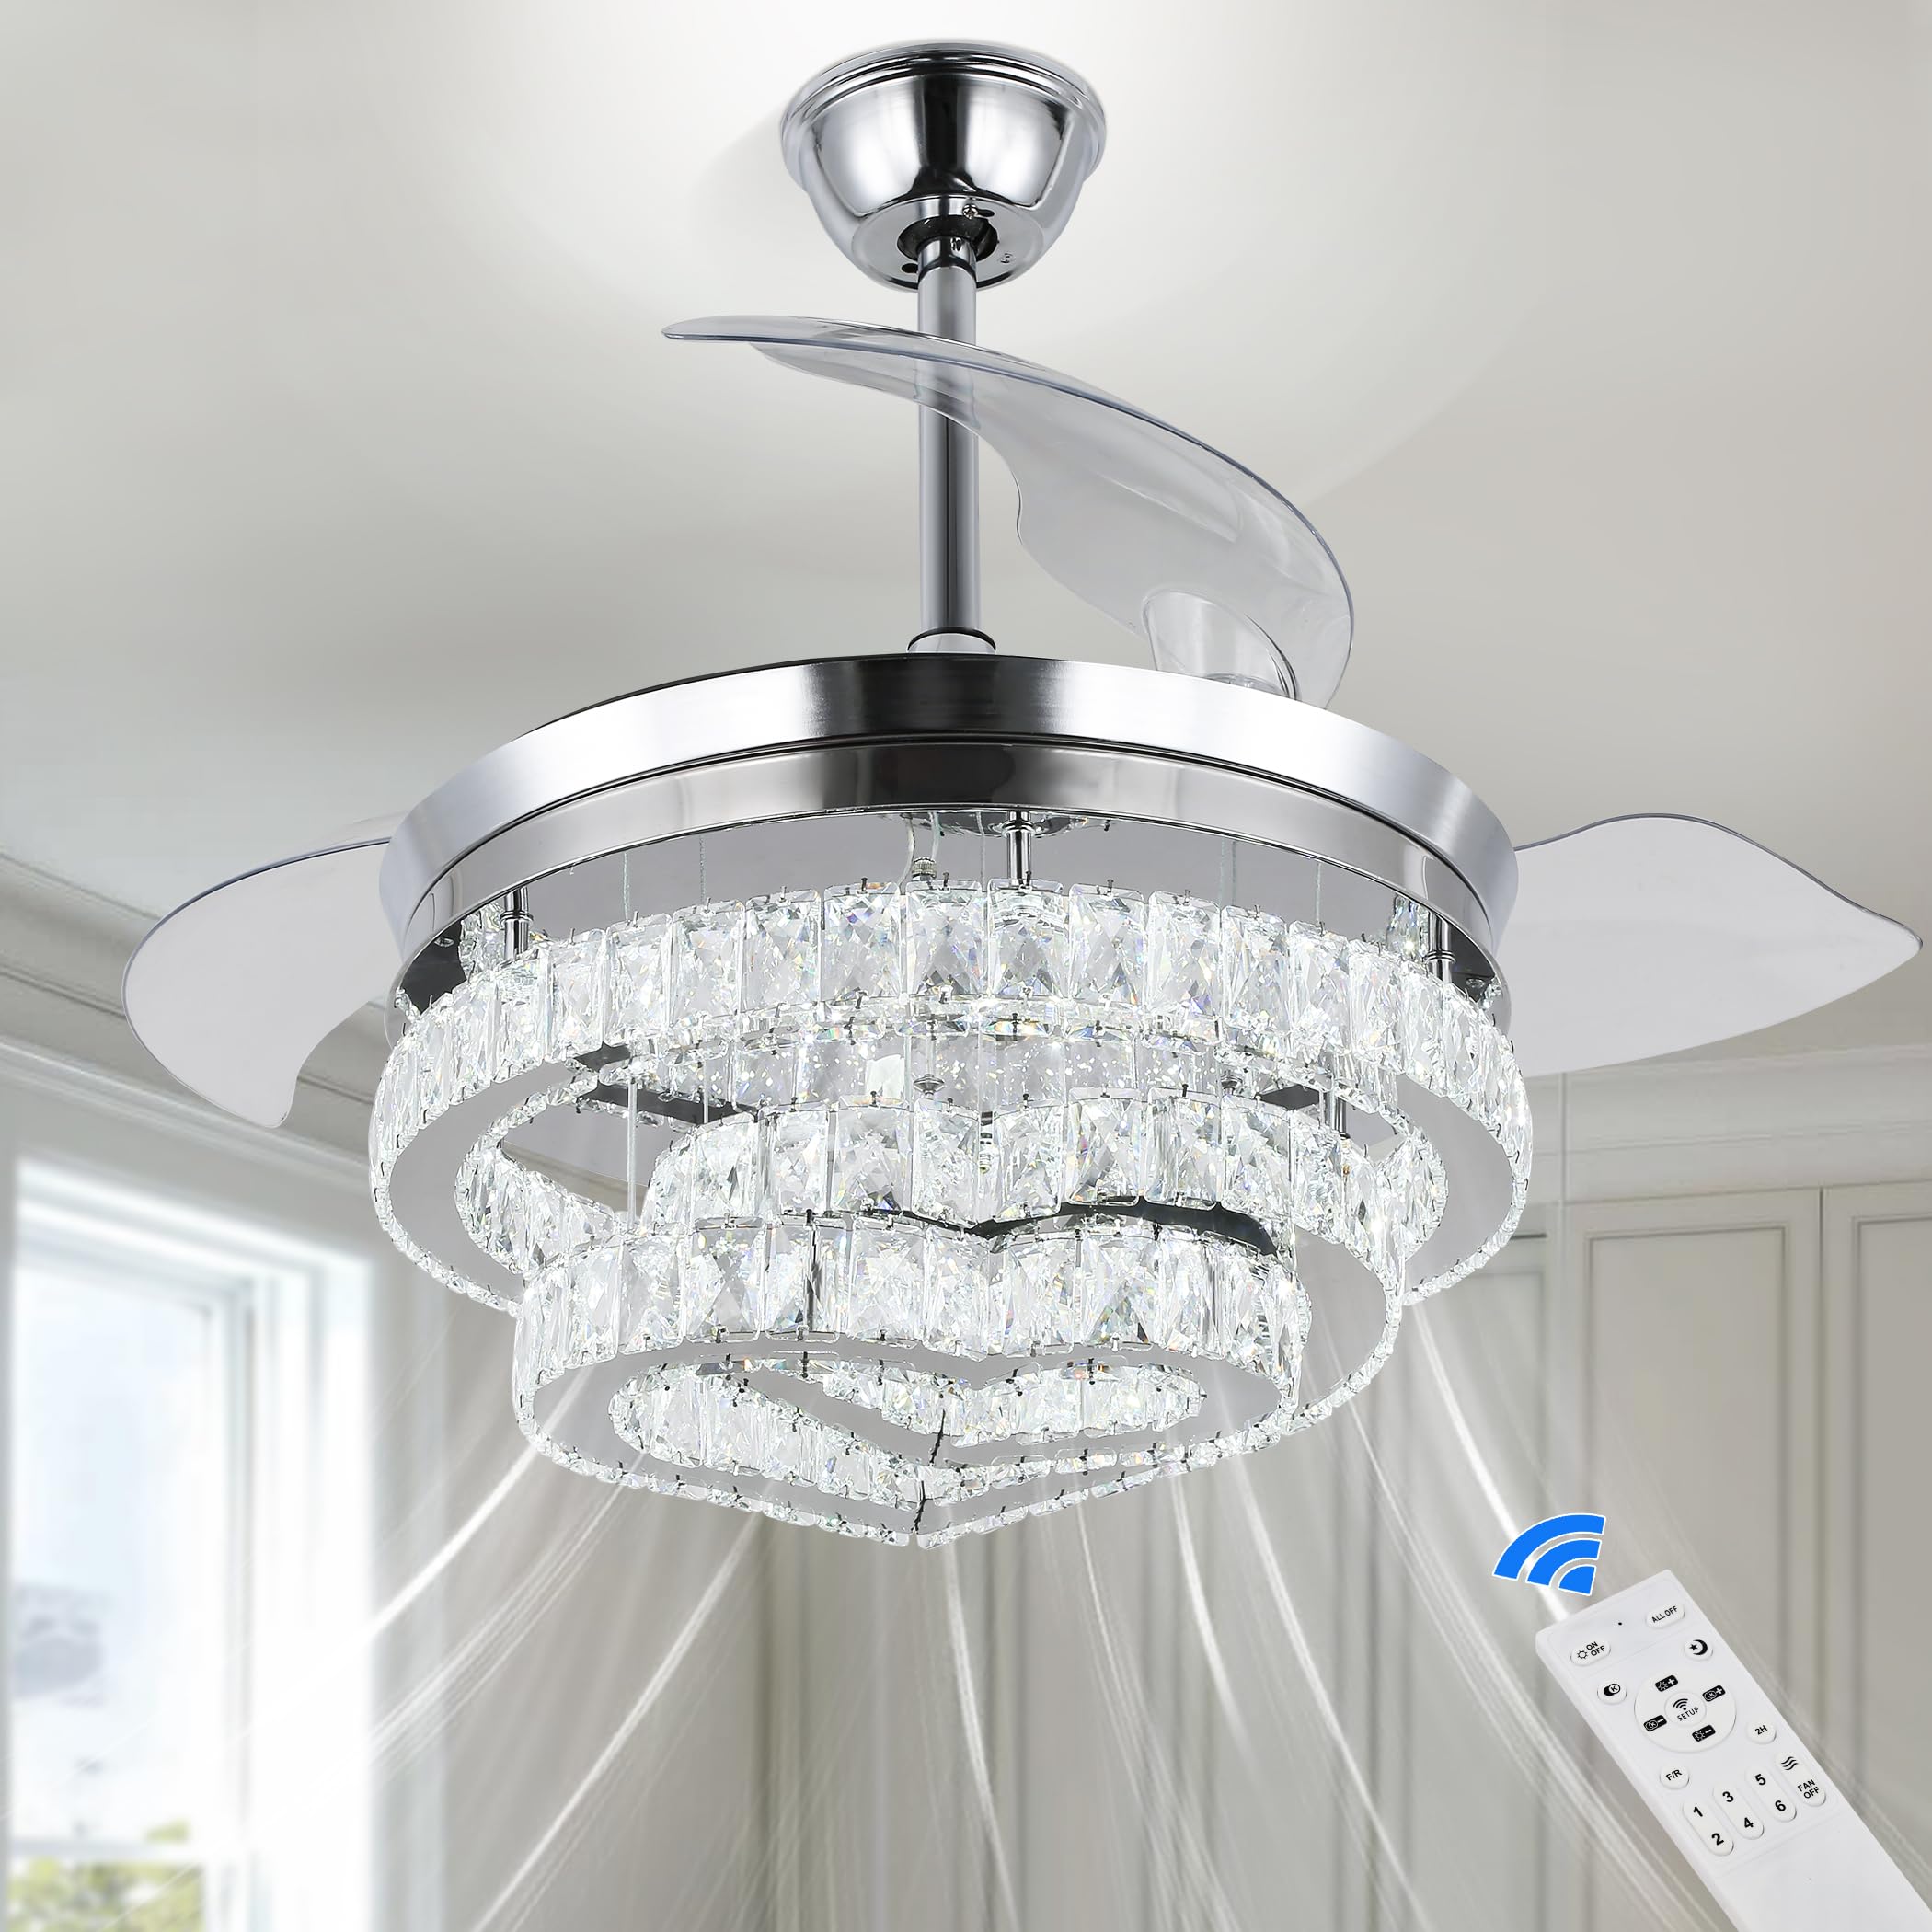 42'' Dimmable Fandelier Modern Crystal Chandelier Ceiling Fan Retractable LED Ceiling Fandeliers with Light and Remote 6-Speed, APP & Memory Function Ceiling Fans for Bedroom